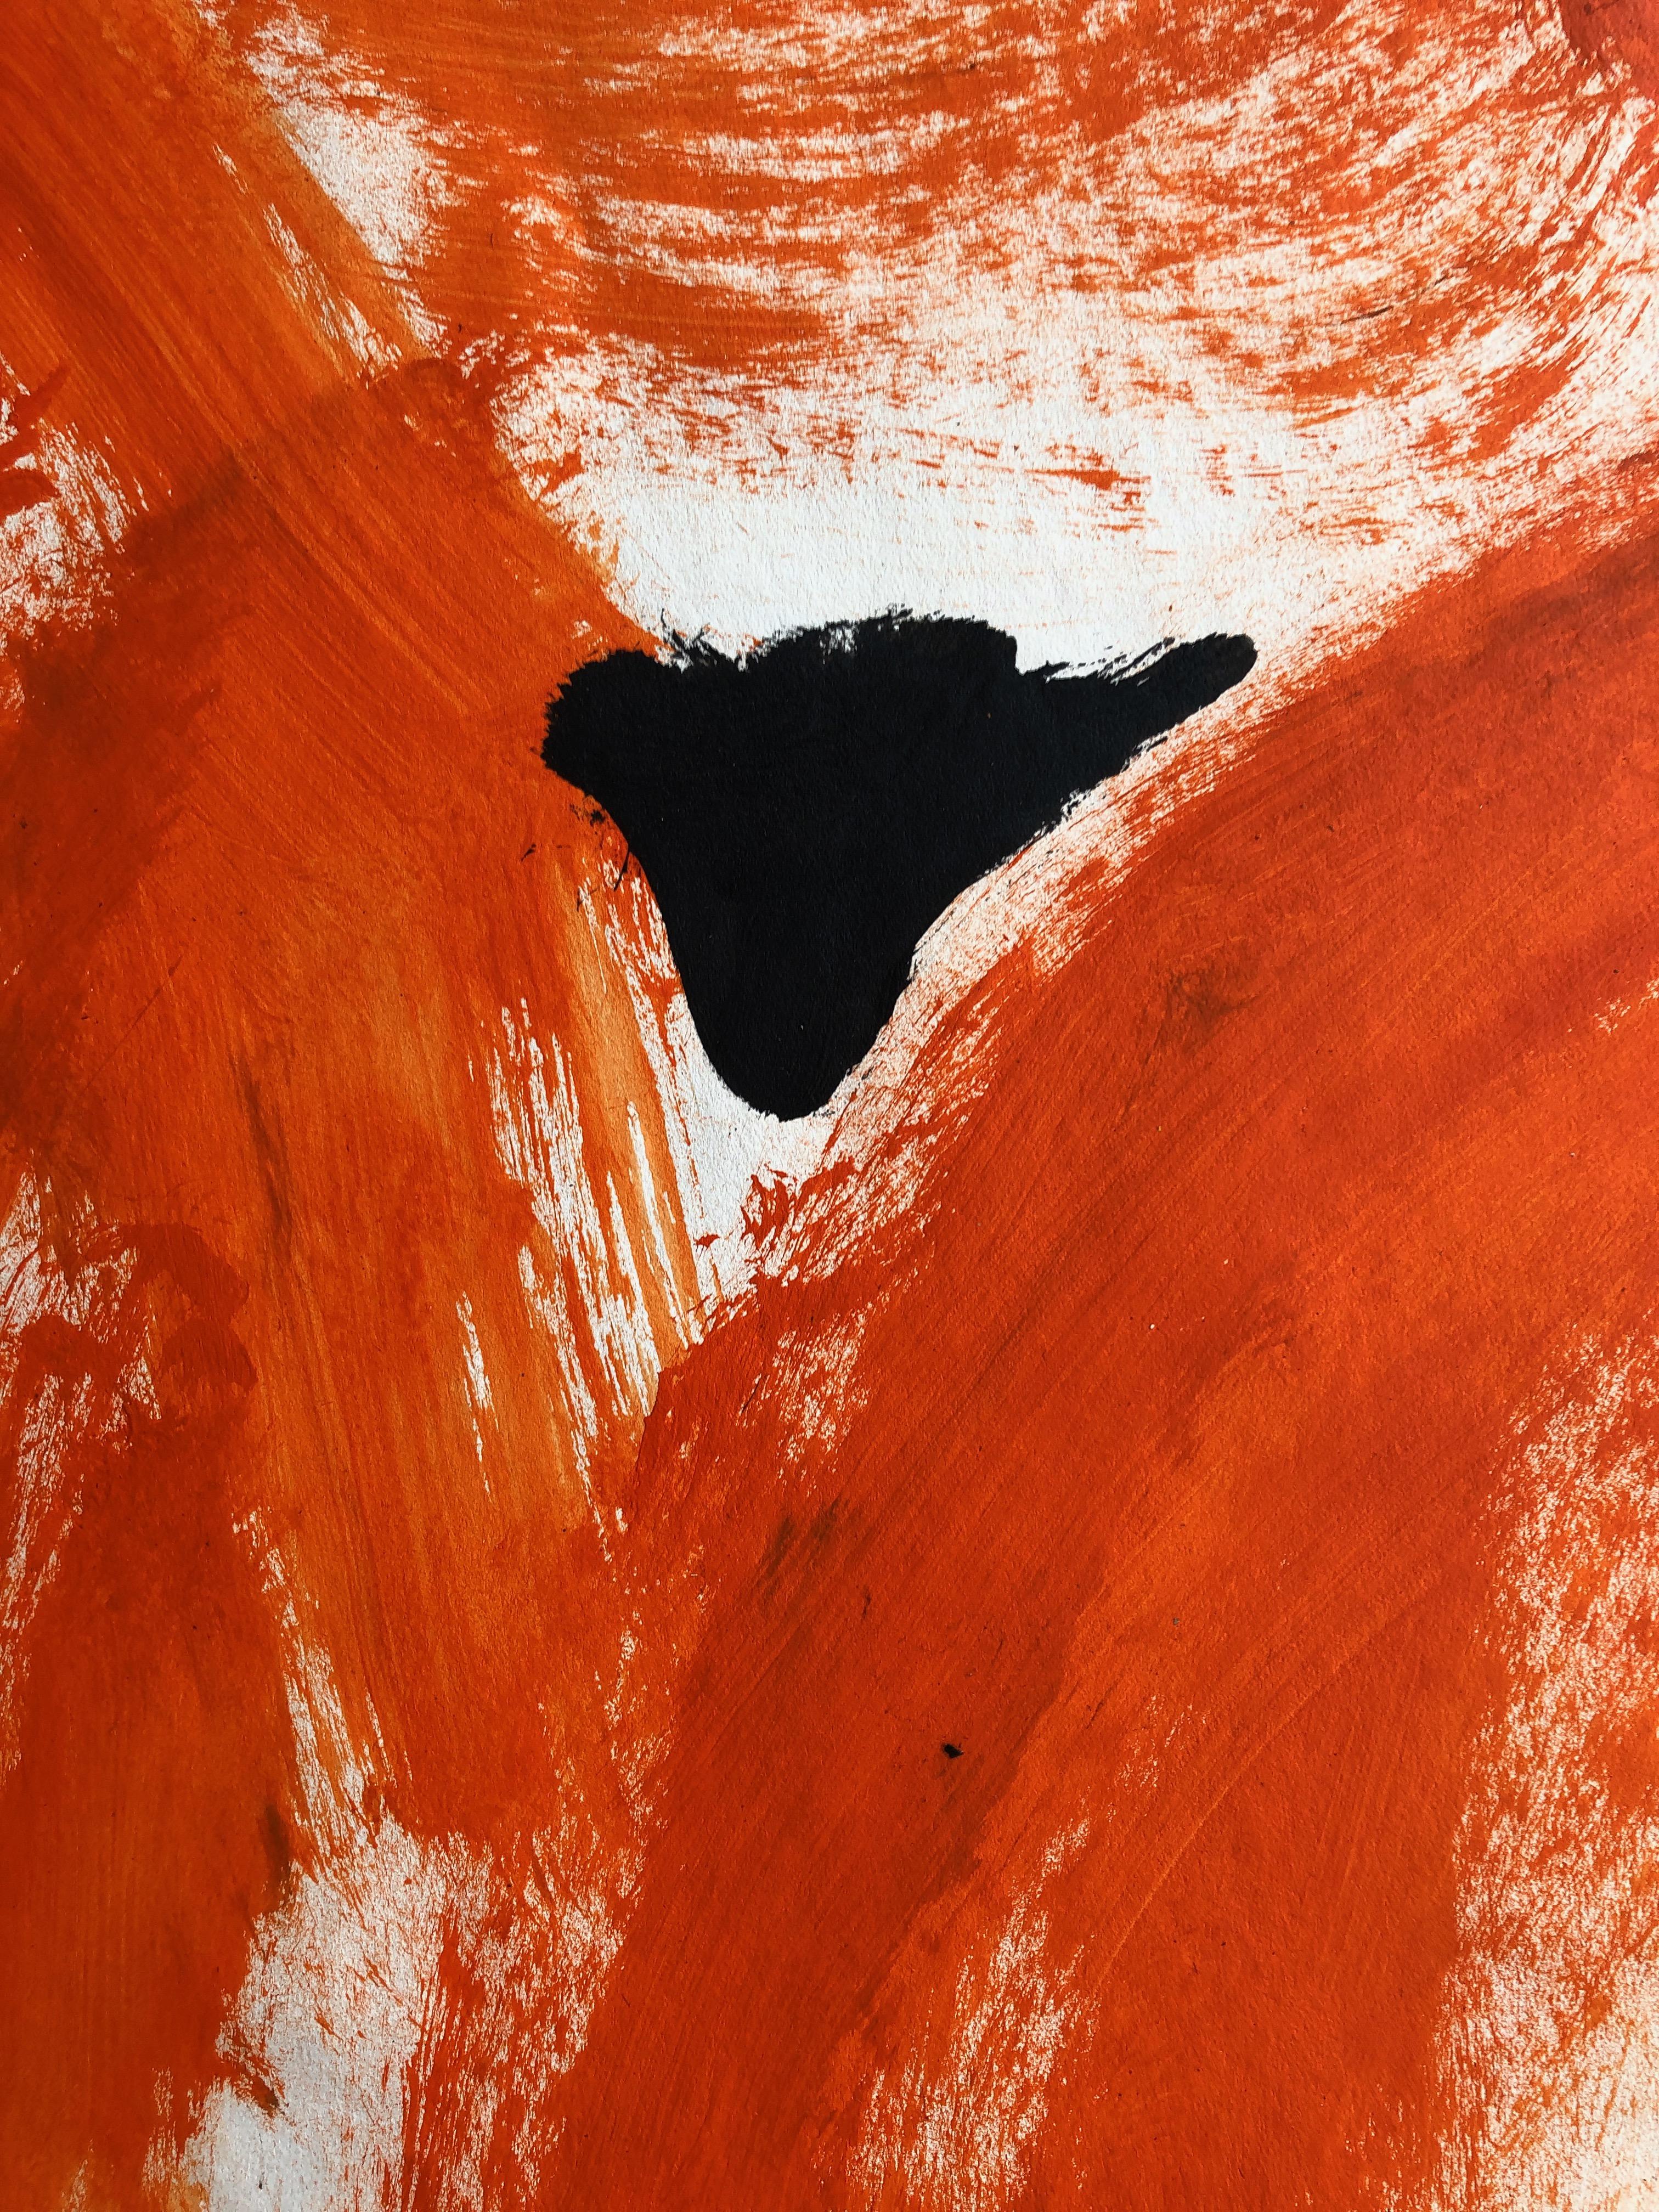 Orange Woman. Contemporary Mixed Media on paper - Painting by Angela Lyle